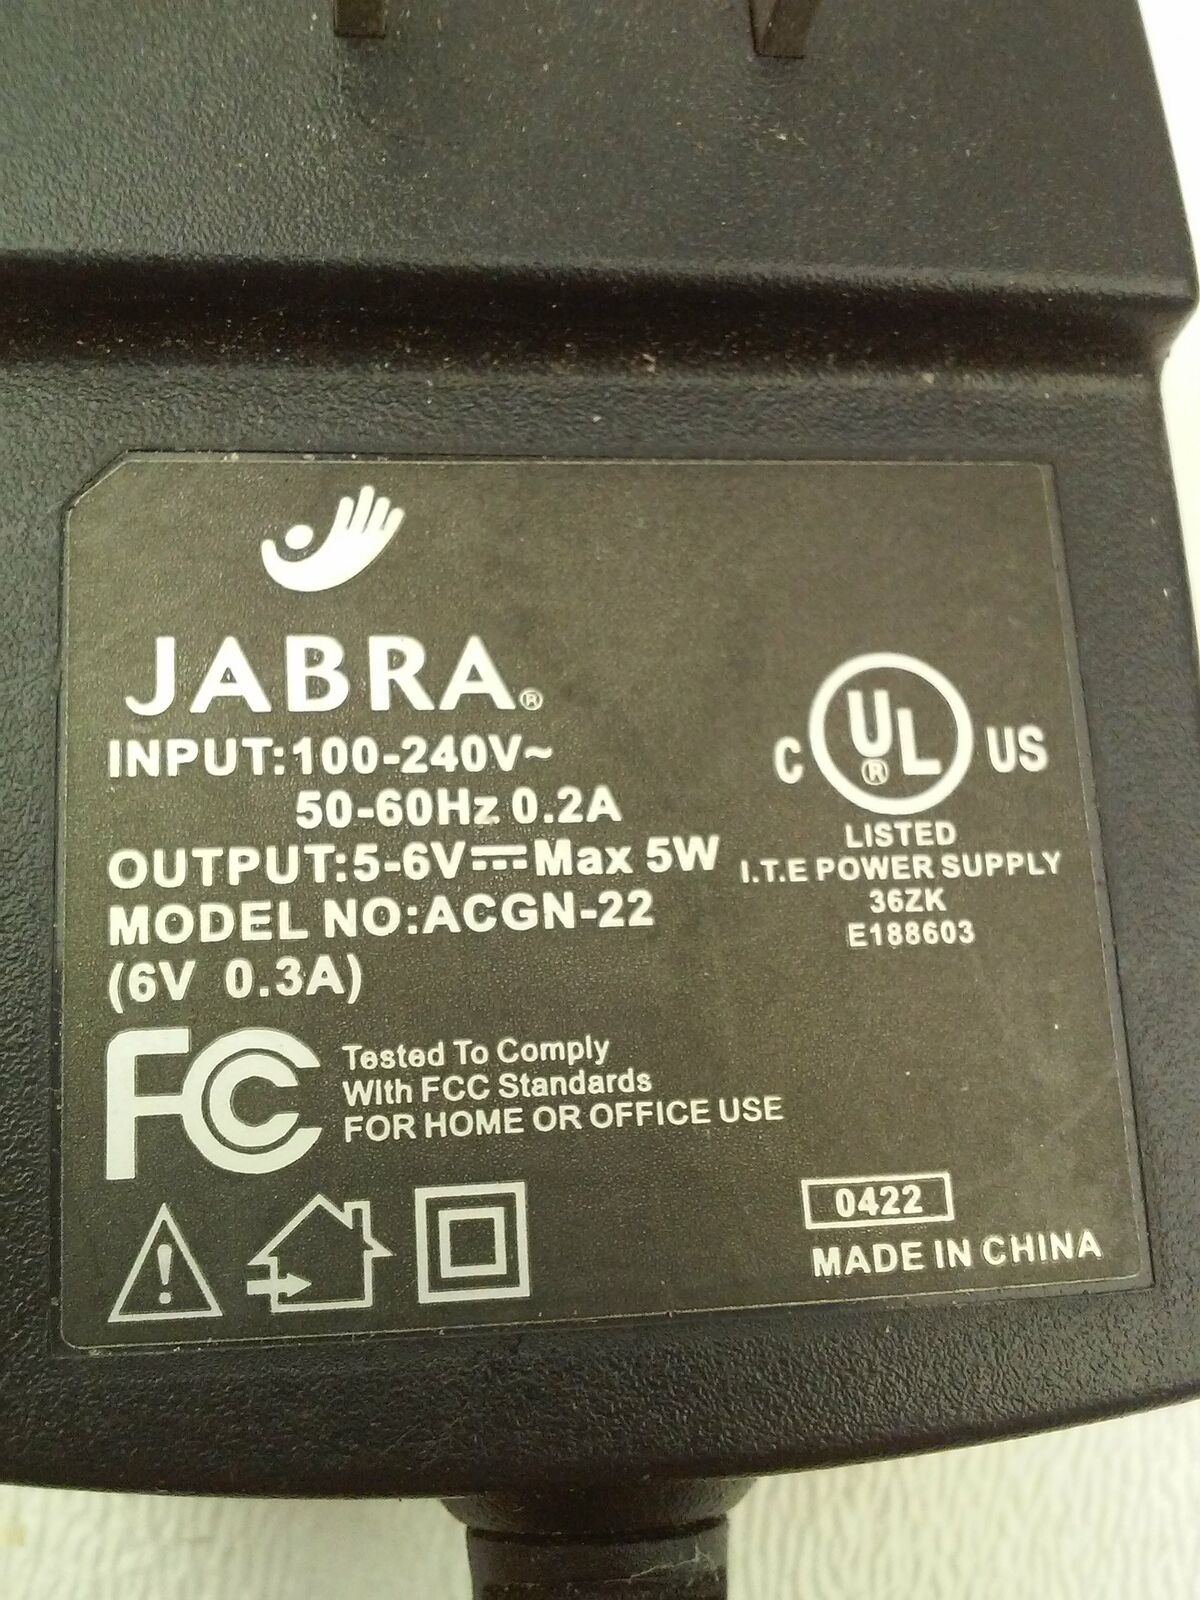 NEW Jabra ACGN-22 5-6V 0.3A Adapter Charger AC Power Supply